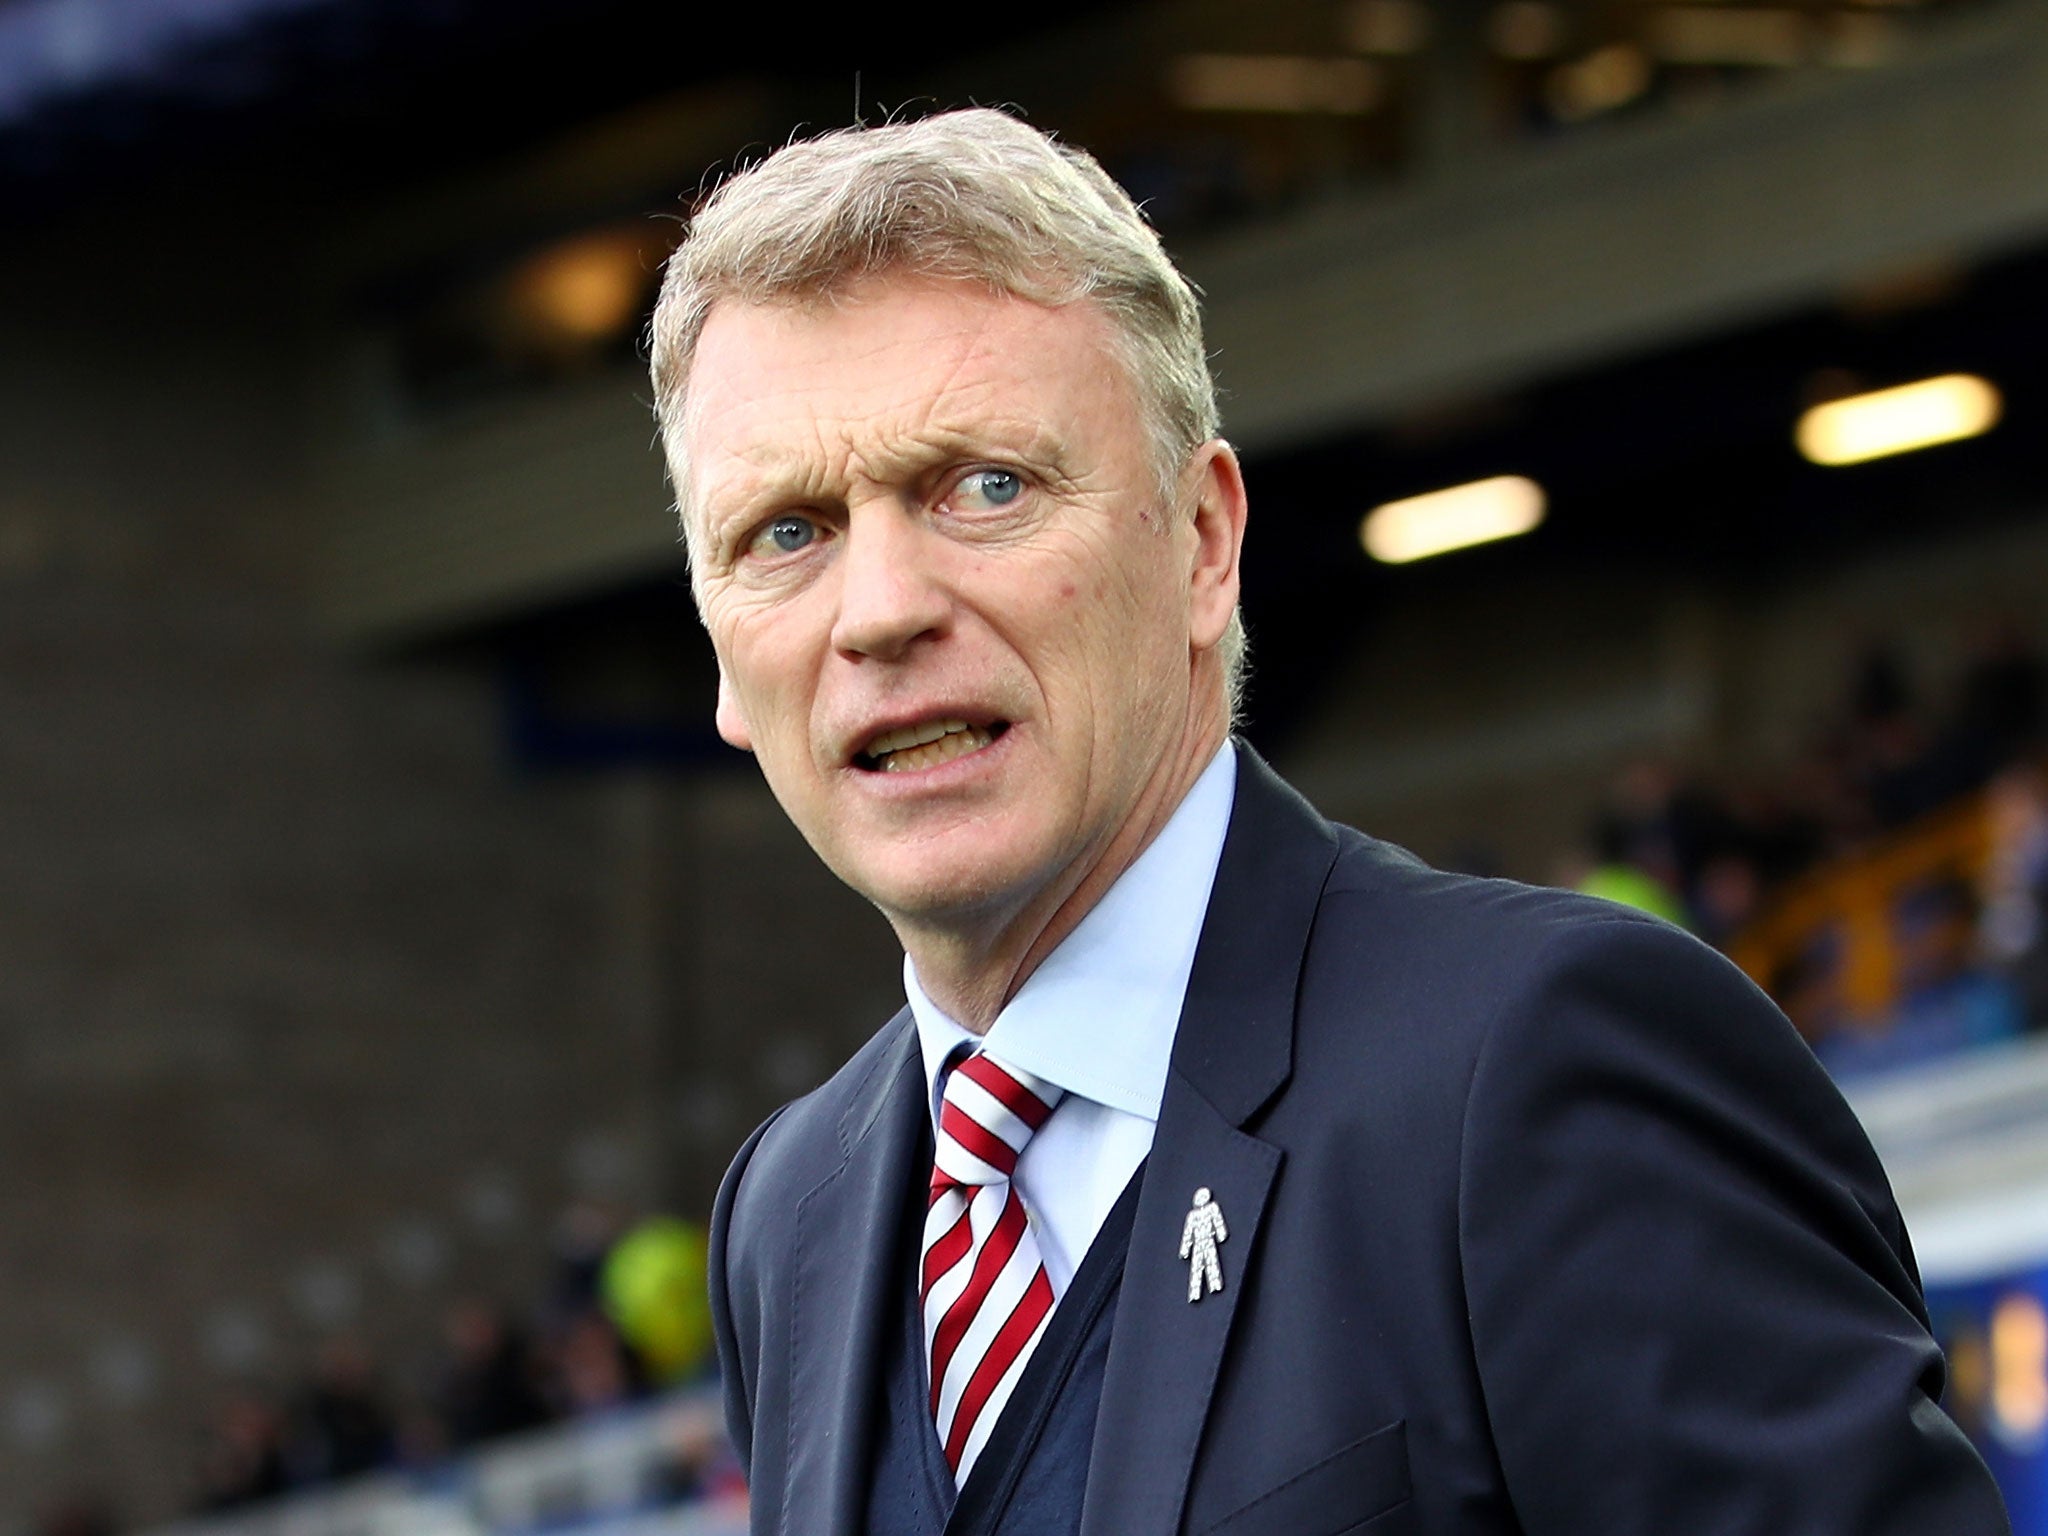 David Moyes faces fresh controversy after being accused of aiming multiple off-camera remarks at female reporters The Independent The Independent